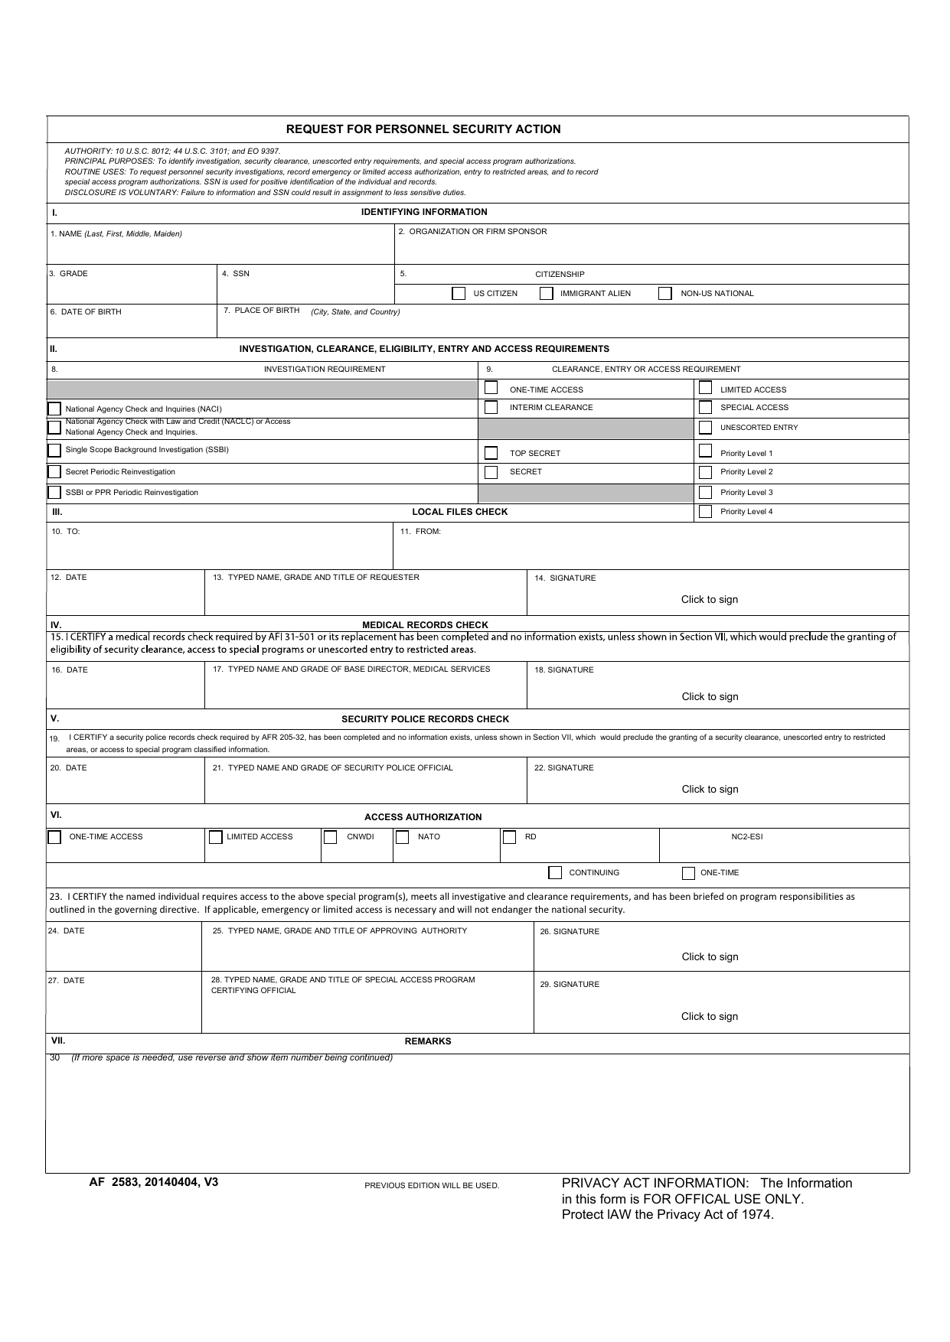 AF Form 2583 Request for Personnel Security Action, Page 1